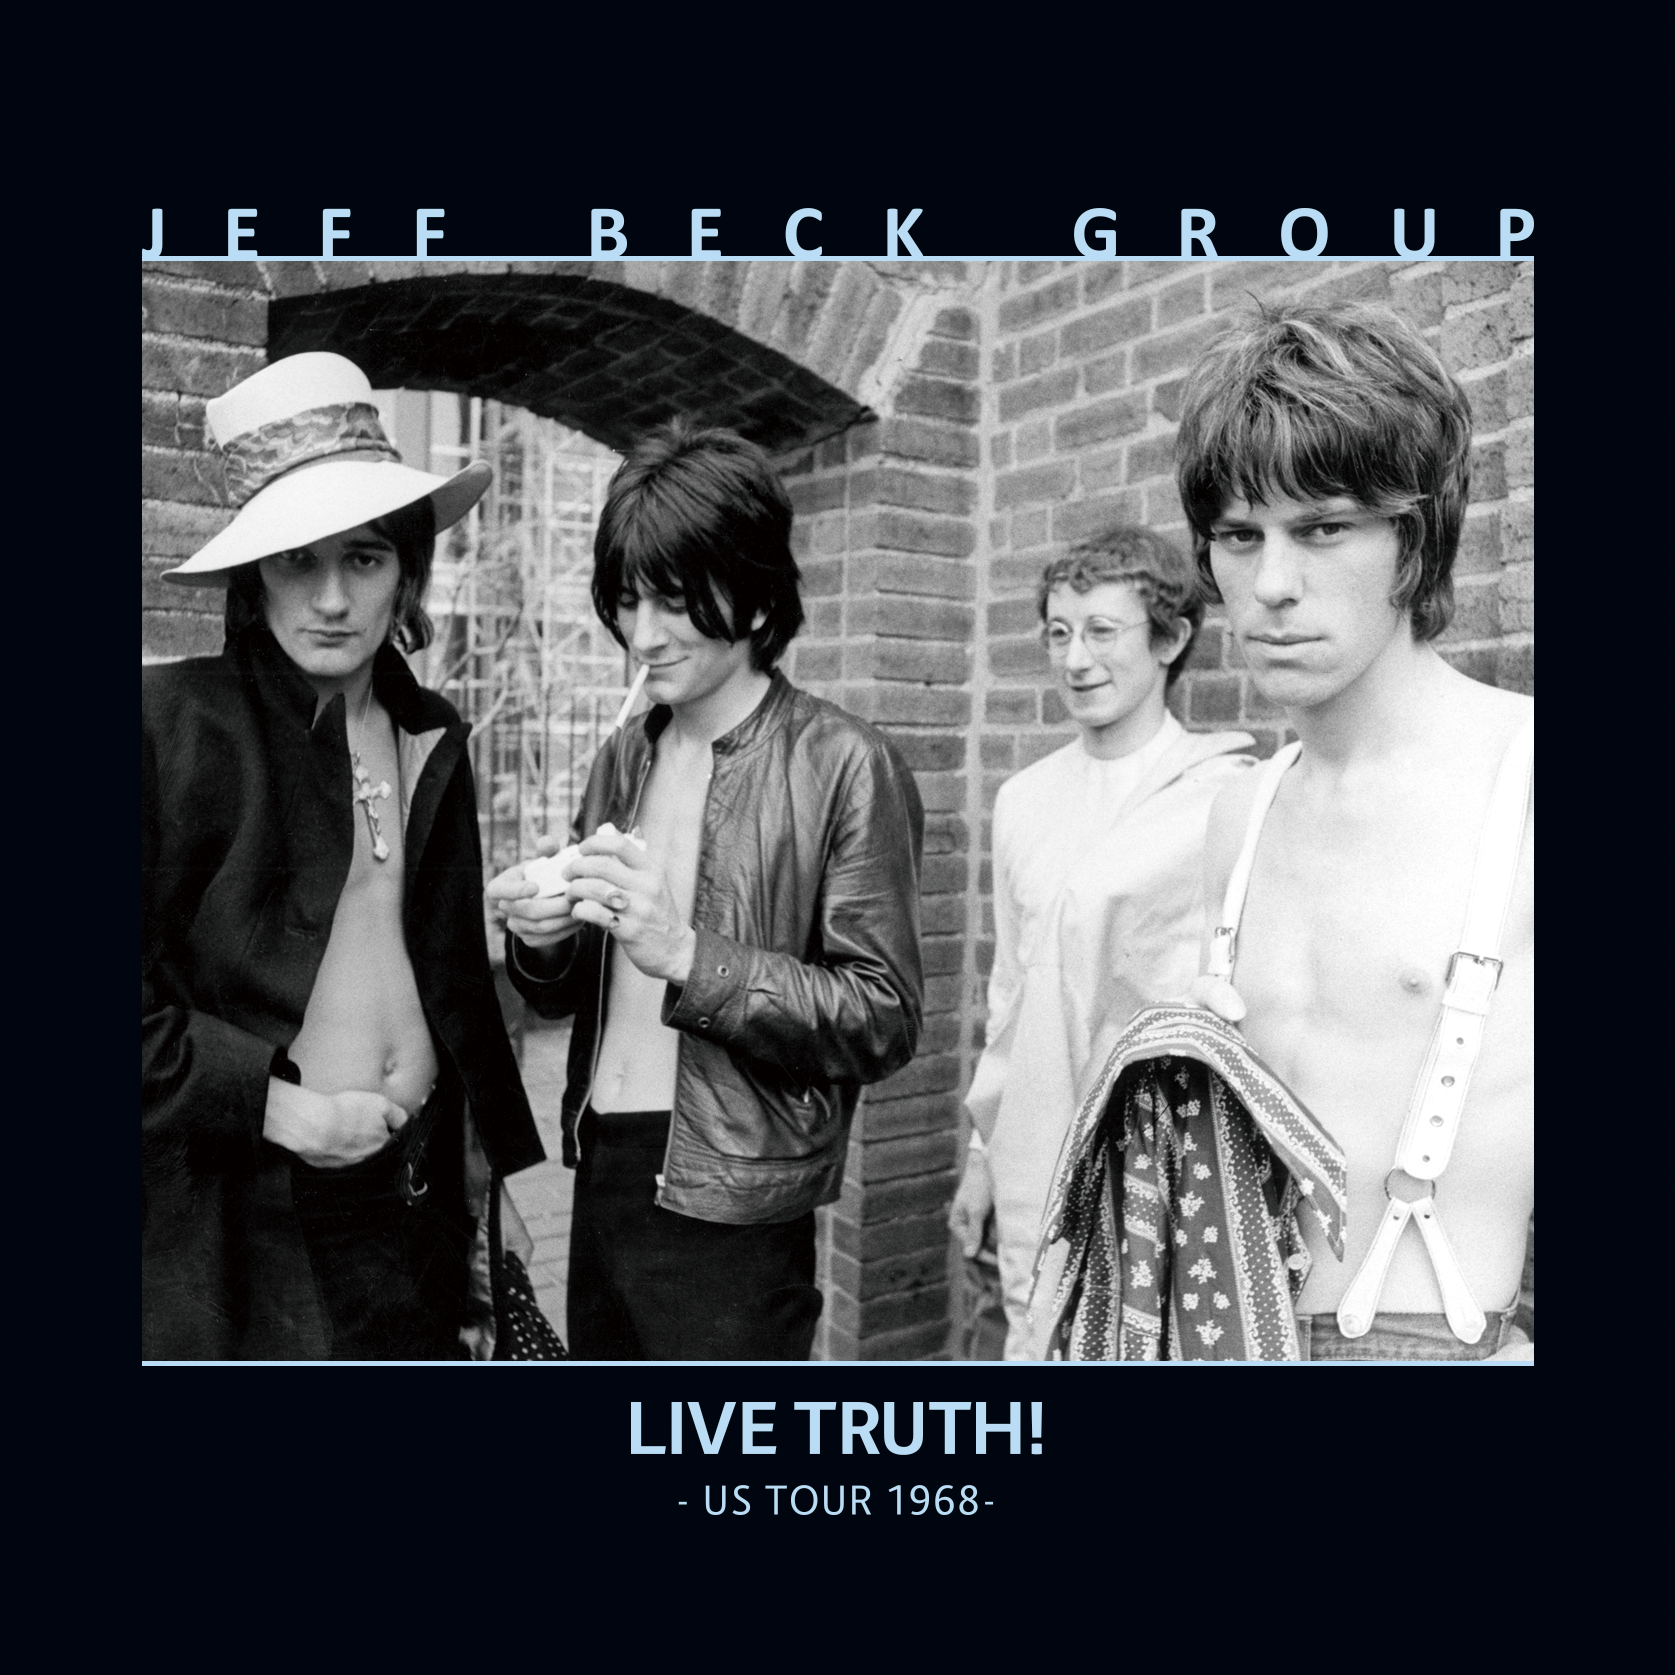 JEFF BECK GROUP / LIVE TRUTH! US TOUR 1968